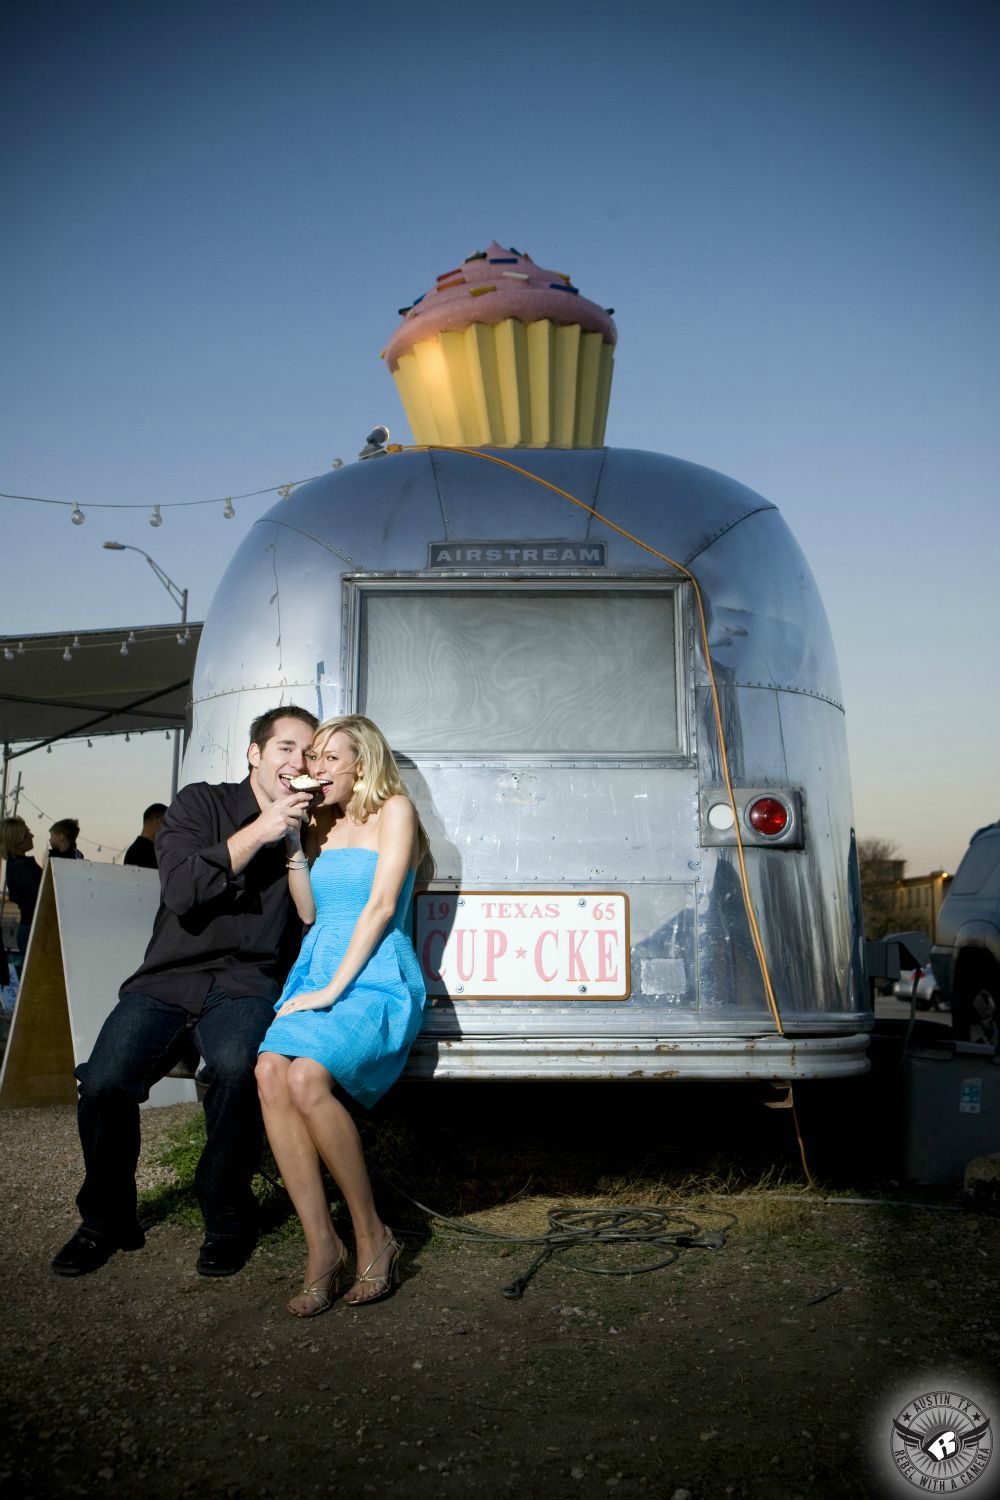 hot blond girl with blue dress and tan heels shares a cupcake with a dark haired guy wearing a dark blue shirt and black pants sitting together on the bumper of the original hey cupcake silver airstream travel trailer with a large cupcake on top in this engagement photograph in southern austin  